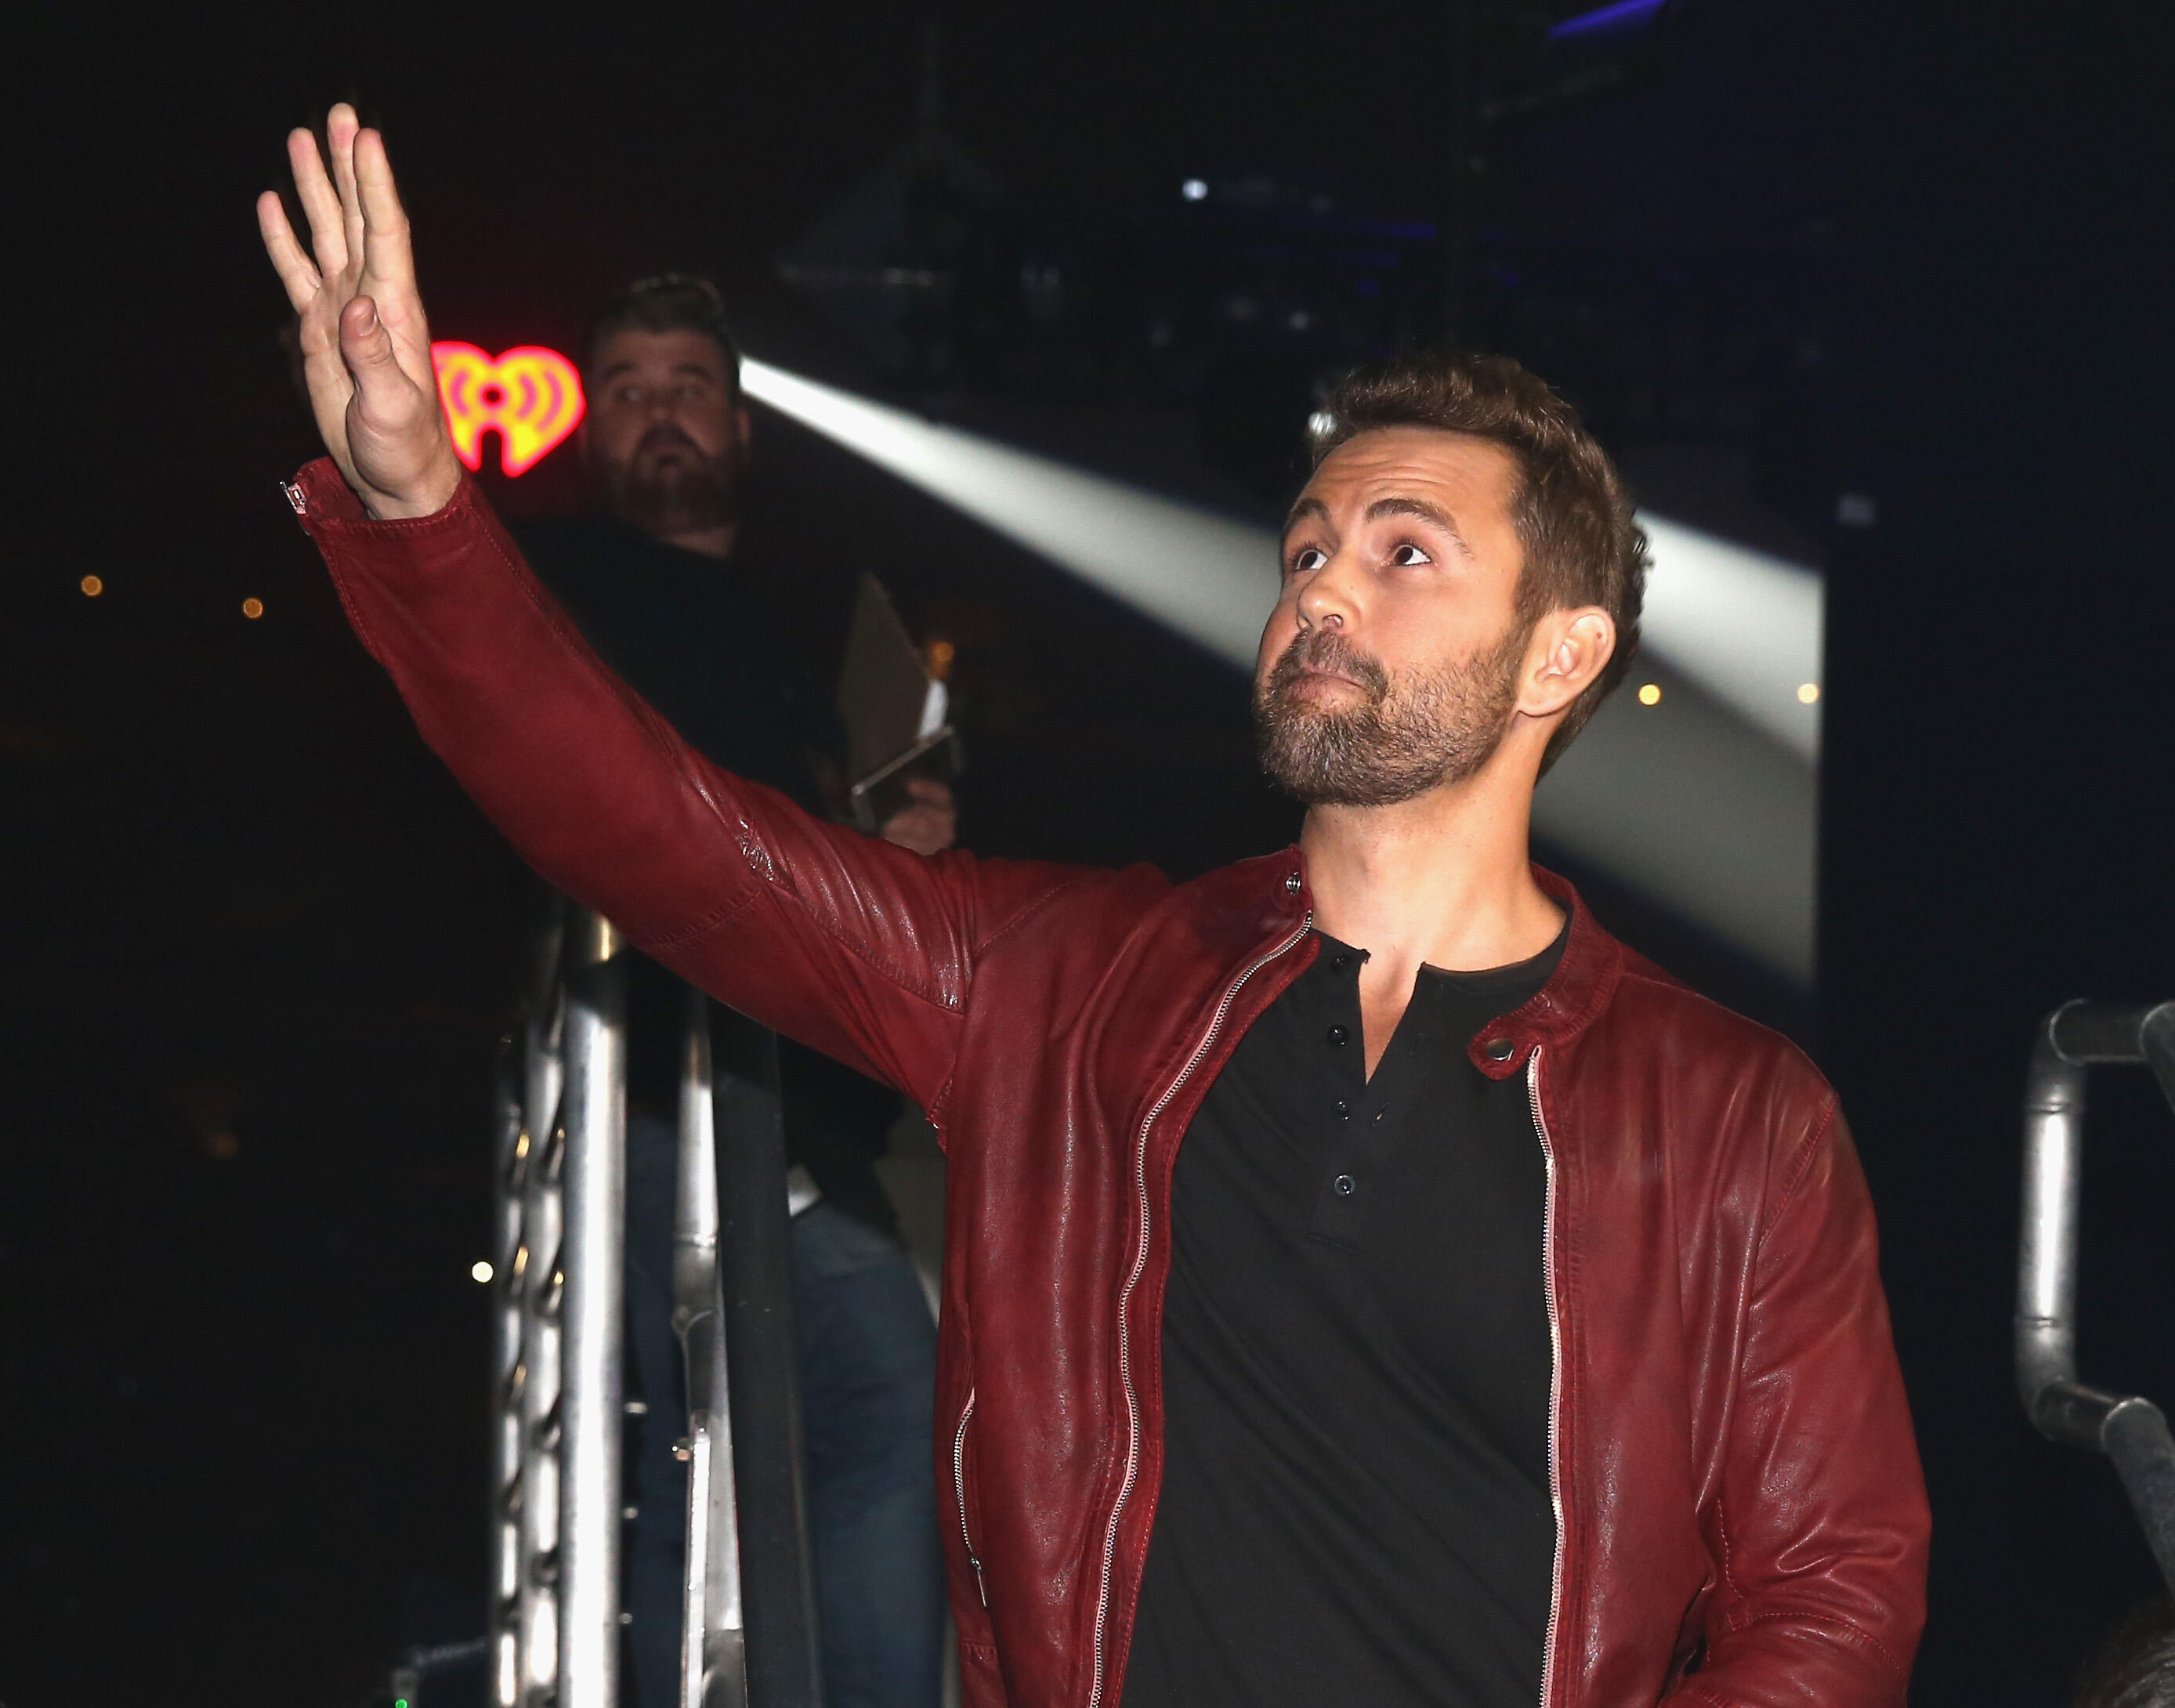 LOS ANGELES, CA - DECEMBER 02:  TV personality Nick Viall waves backstage during 102.7 KIIS FM's Jingle Ball 2016 presented by Capital One at Staples Center on December 2, 2016 in Los Angeles, California.  (Photo by Joe Scarnici/Getty Images for iHeartMed